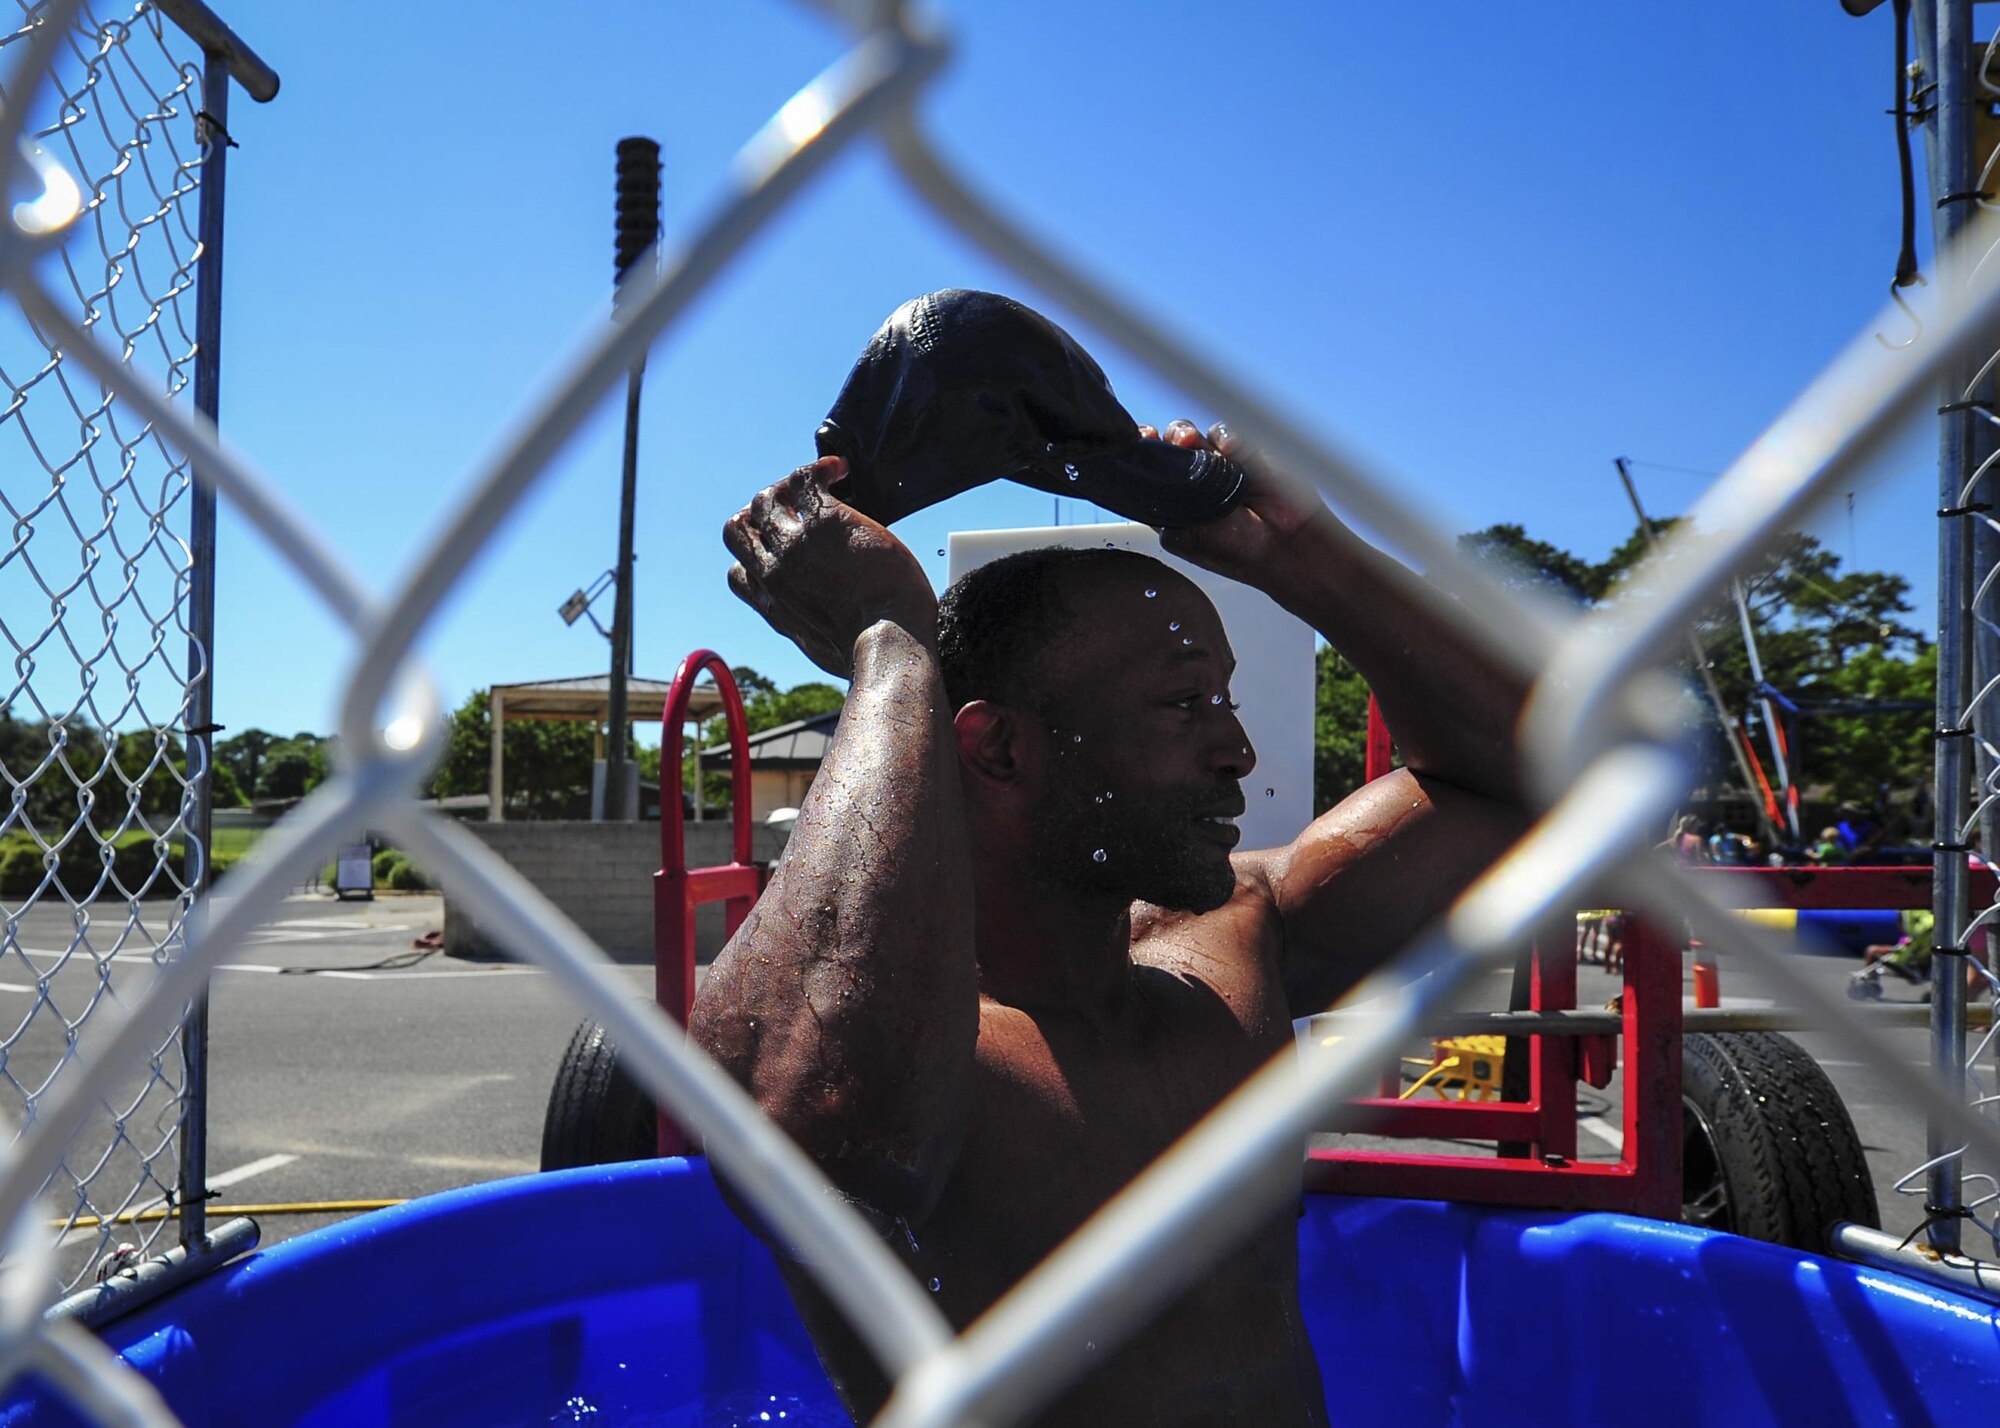 Chief Master Sgt. Quinton Burris, the public affairs functional manager for Air Force Special Operations Command, participates in the Hurlburt Chiefs’ Group dunk tank during the Sound of Independence at Hurlburt Field, Fla., June 24, 2016. The Sound of Independence is an annual Fourth of July celebration hosted by the 1st Special Operations Force Support Squadron. (U.S. Air Force photo by Airman 1st Class Joseph Pick)